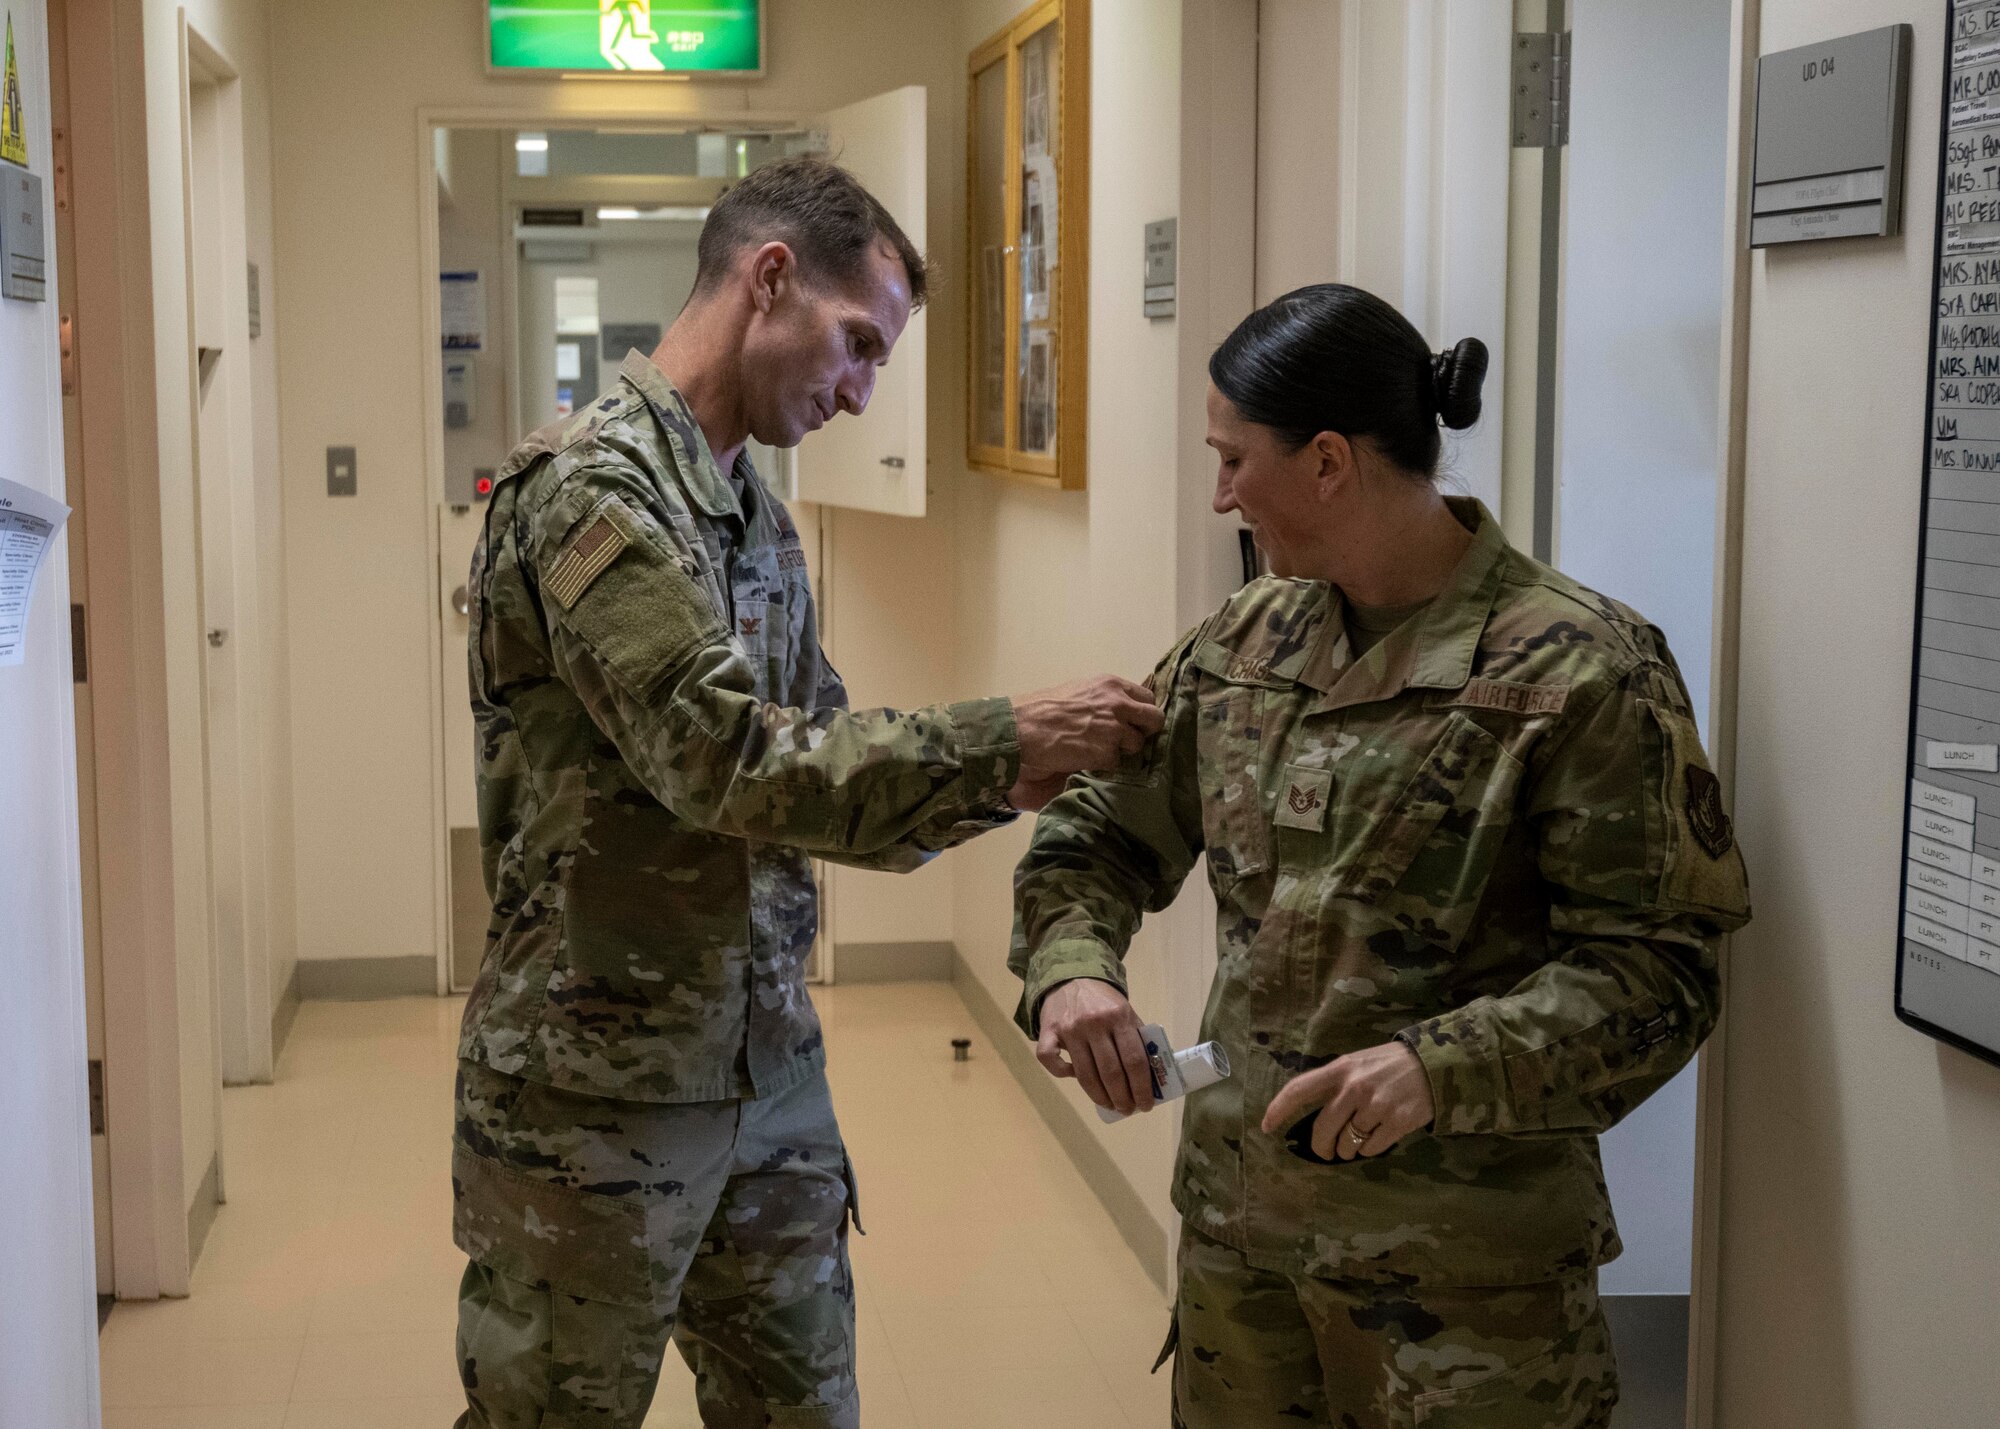 U.S. Air Force Col. Michael Richard, 35th Fighter Wing commander, exchanges patches with Tech. Sgt. Amanda Chase, TRICARE Operations and Patient Administration flight chief, during a Wild Weasel Walk-through at Misawa Air Base, Japan.